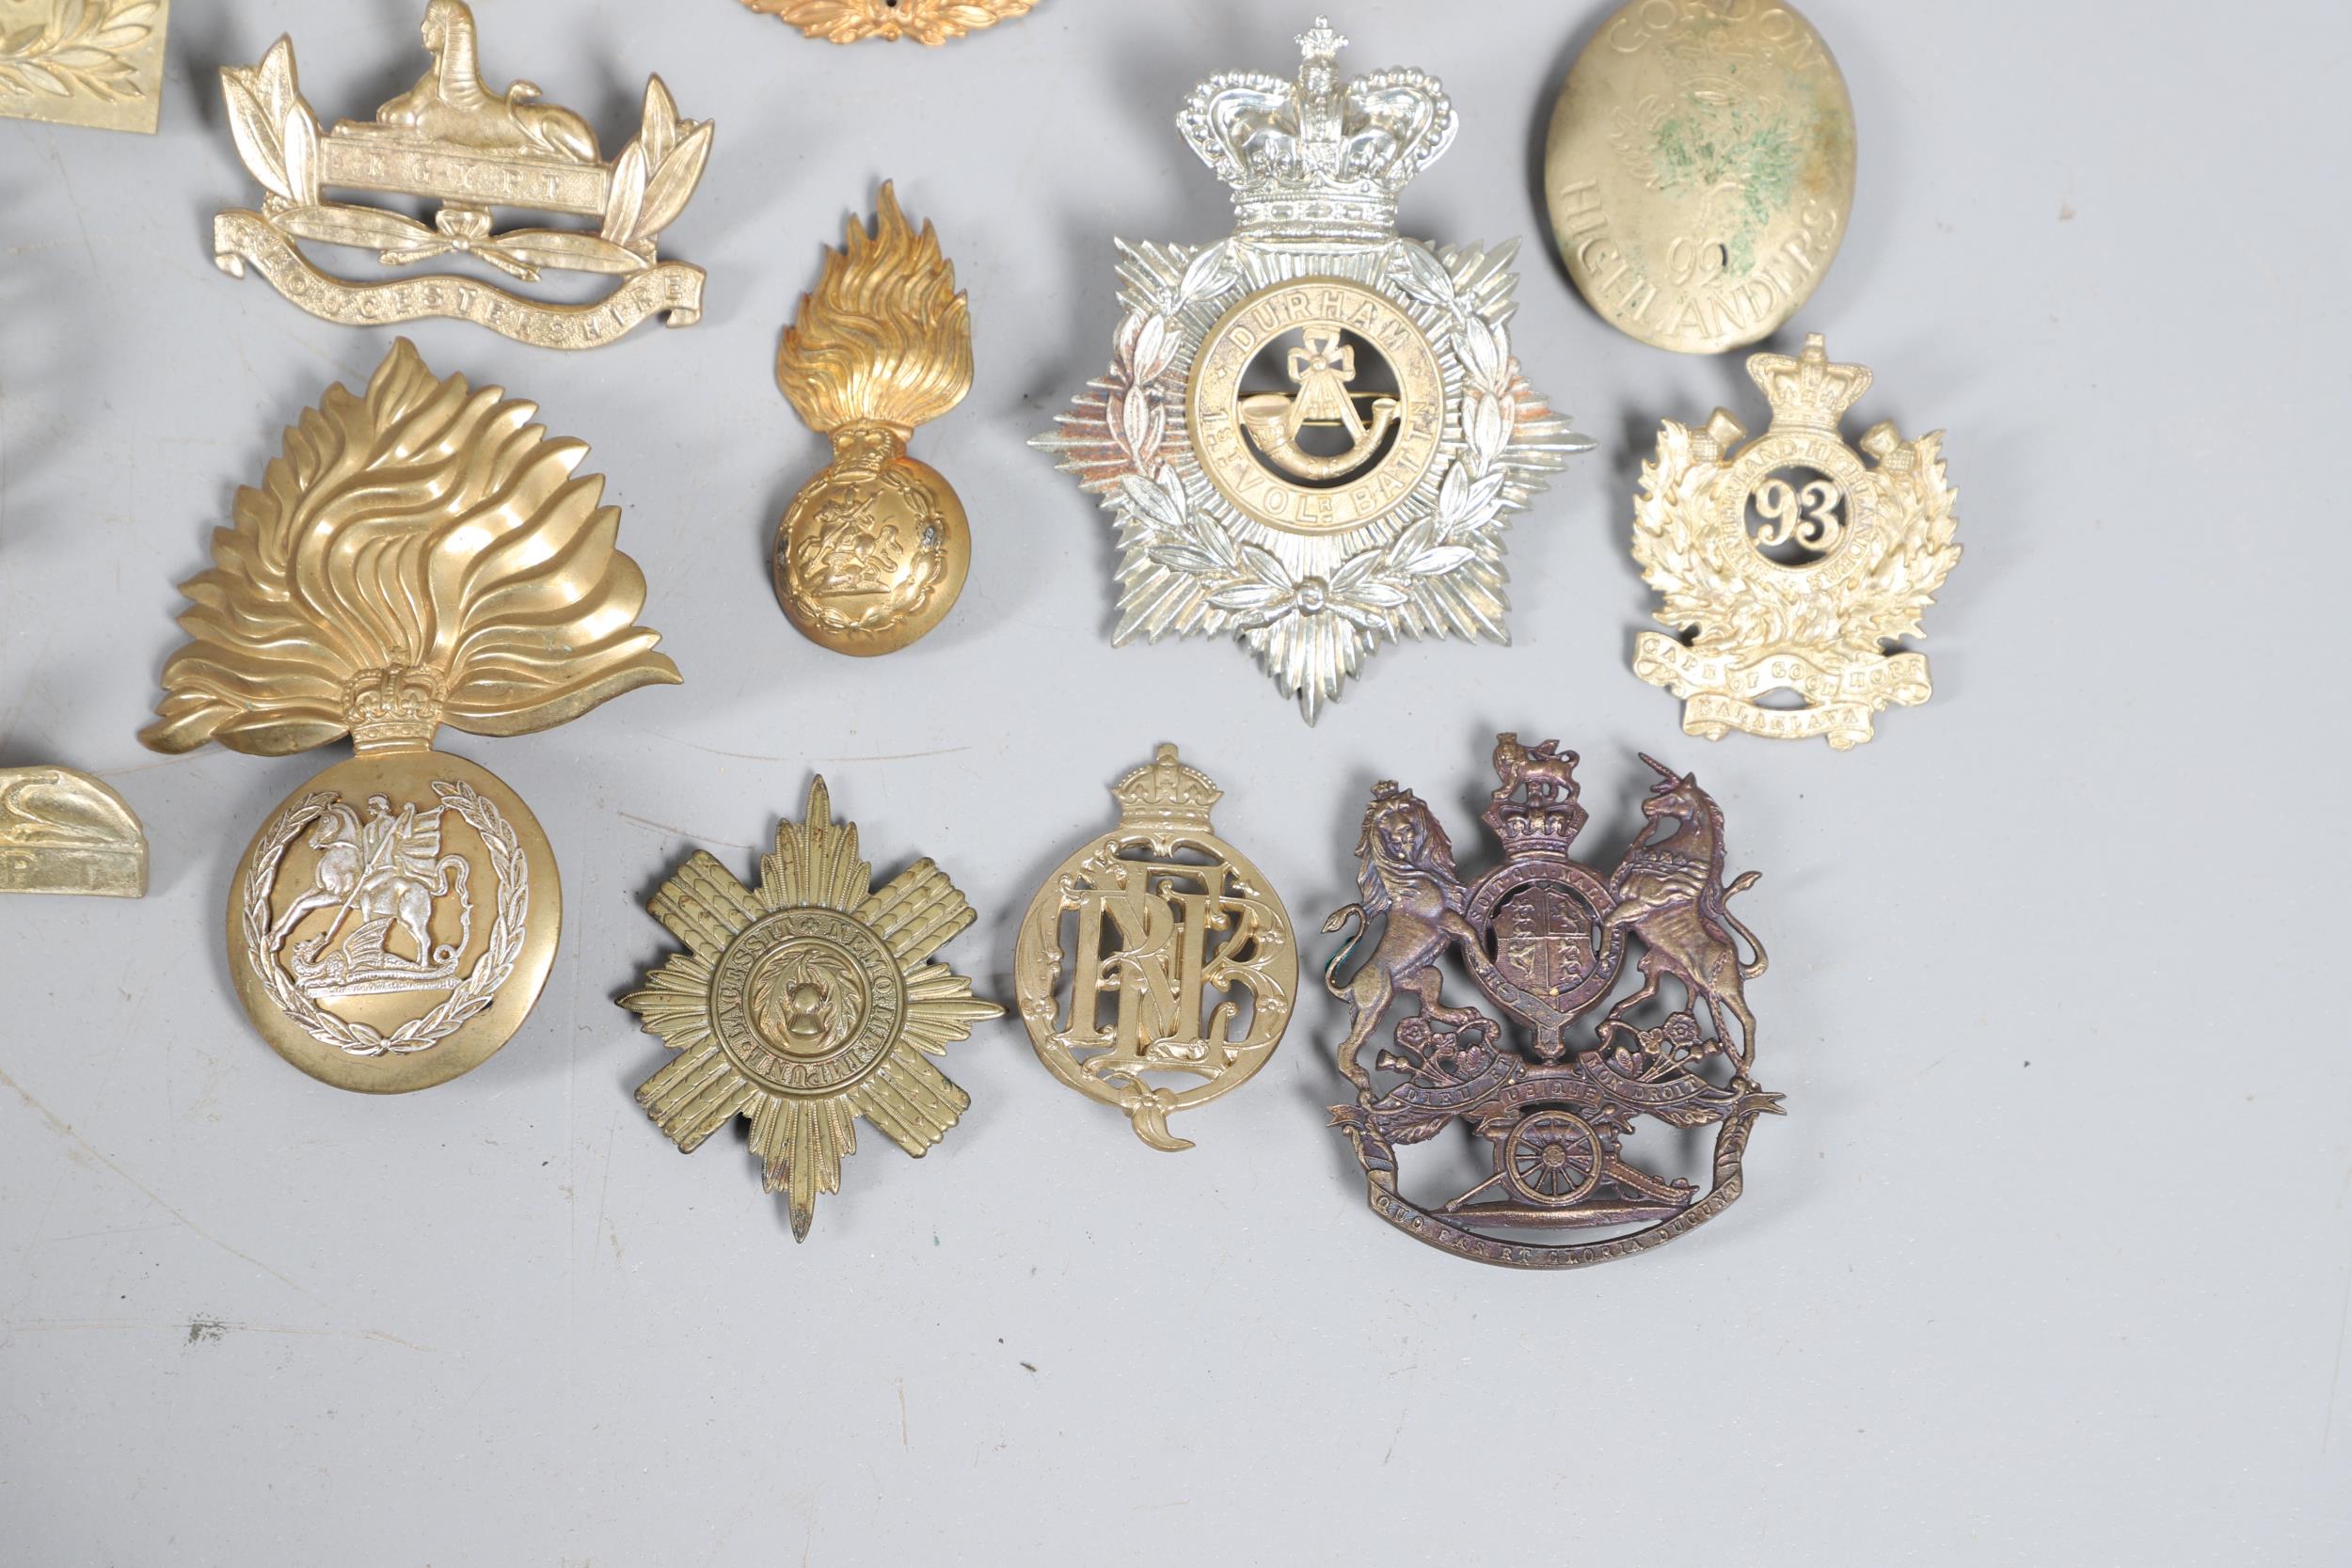 A COLLECTION OF VICTORIAN STYLE HELMET PLATES AND OTHER BADGES. - Image 7 of 10